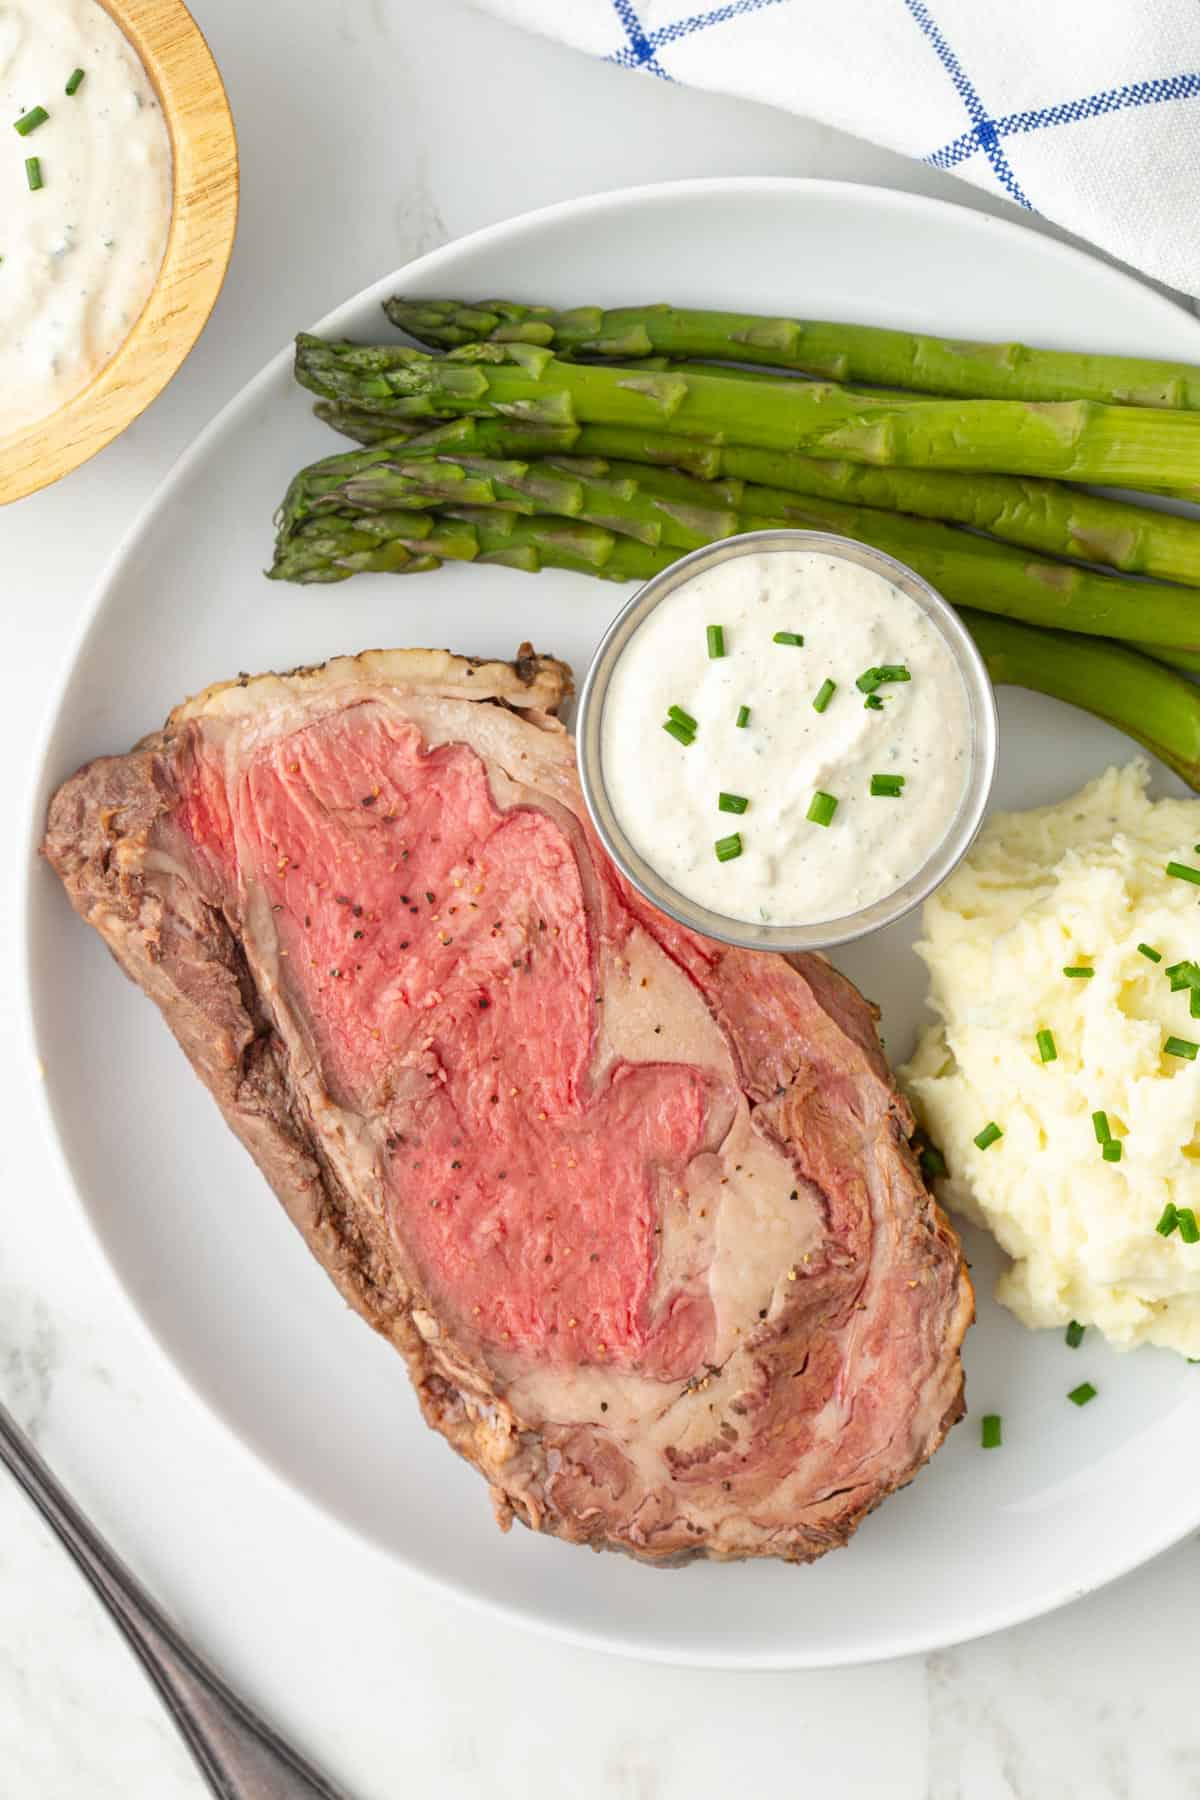 A slice of prime rib, asparagus, mashed potatoes and a condiment cup of horseradish sauce on a plate.